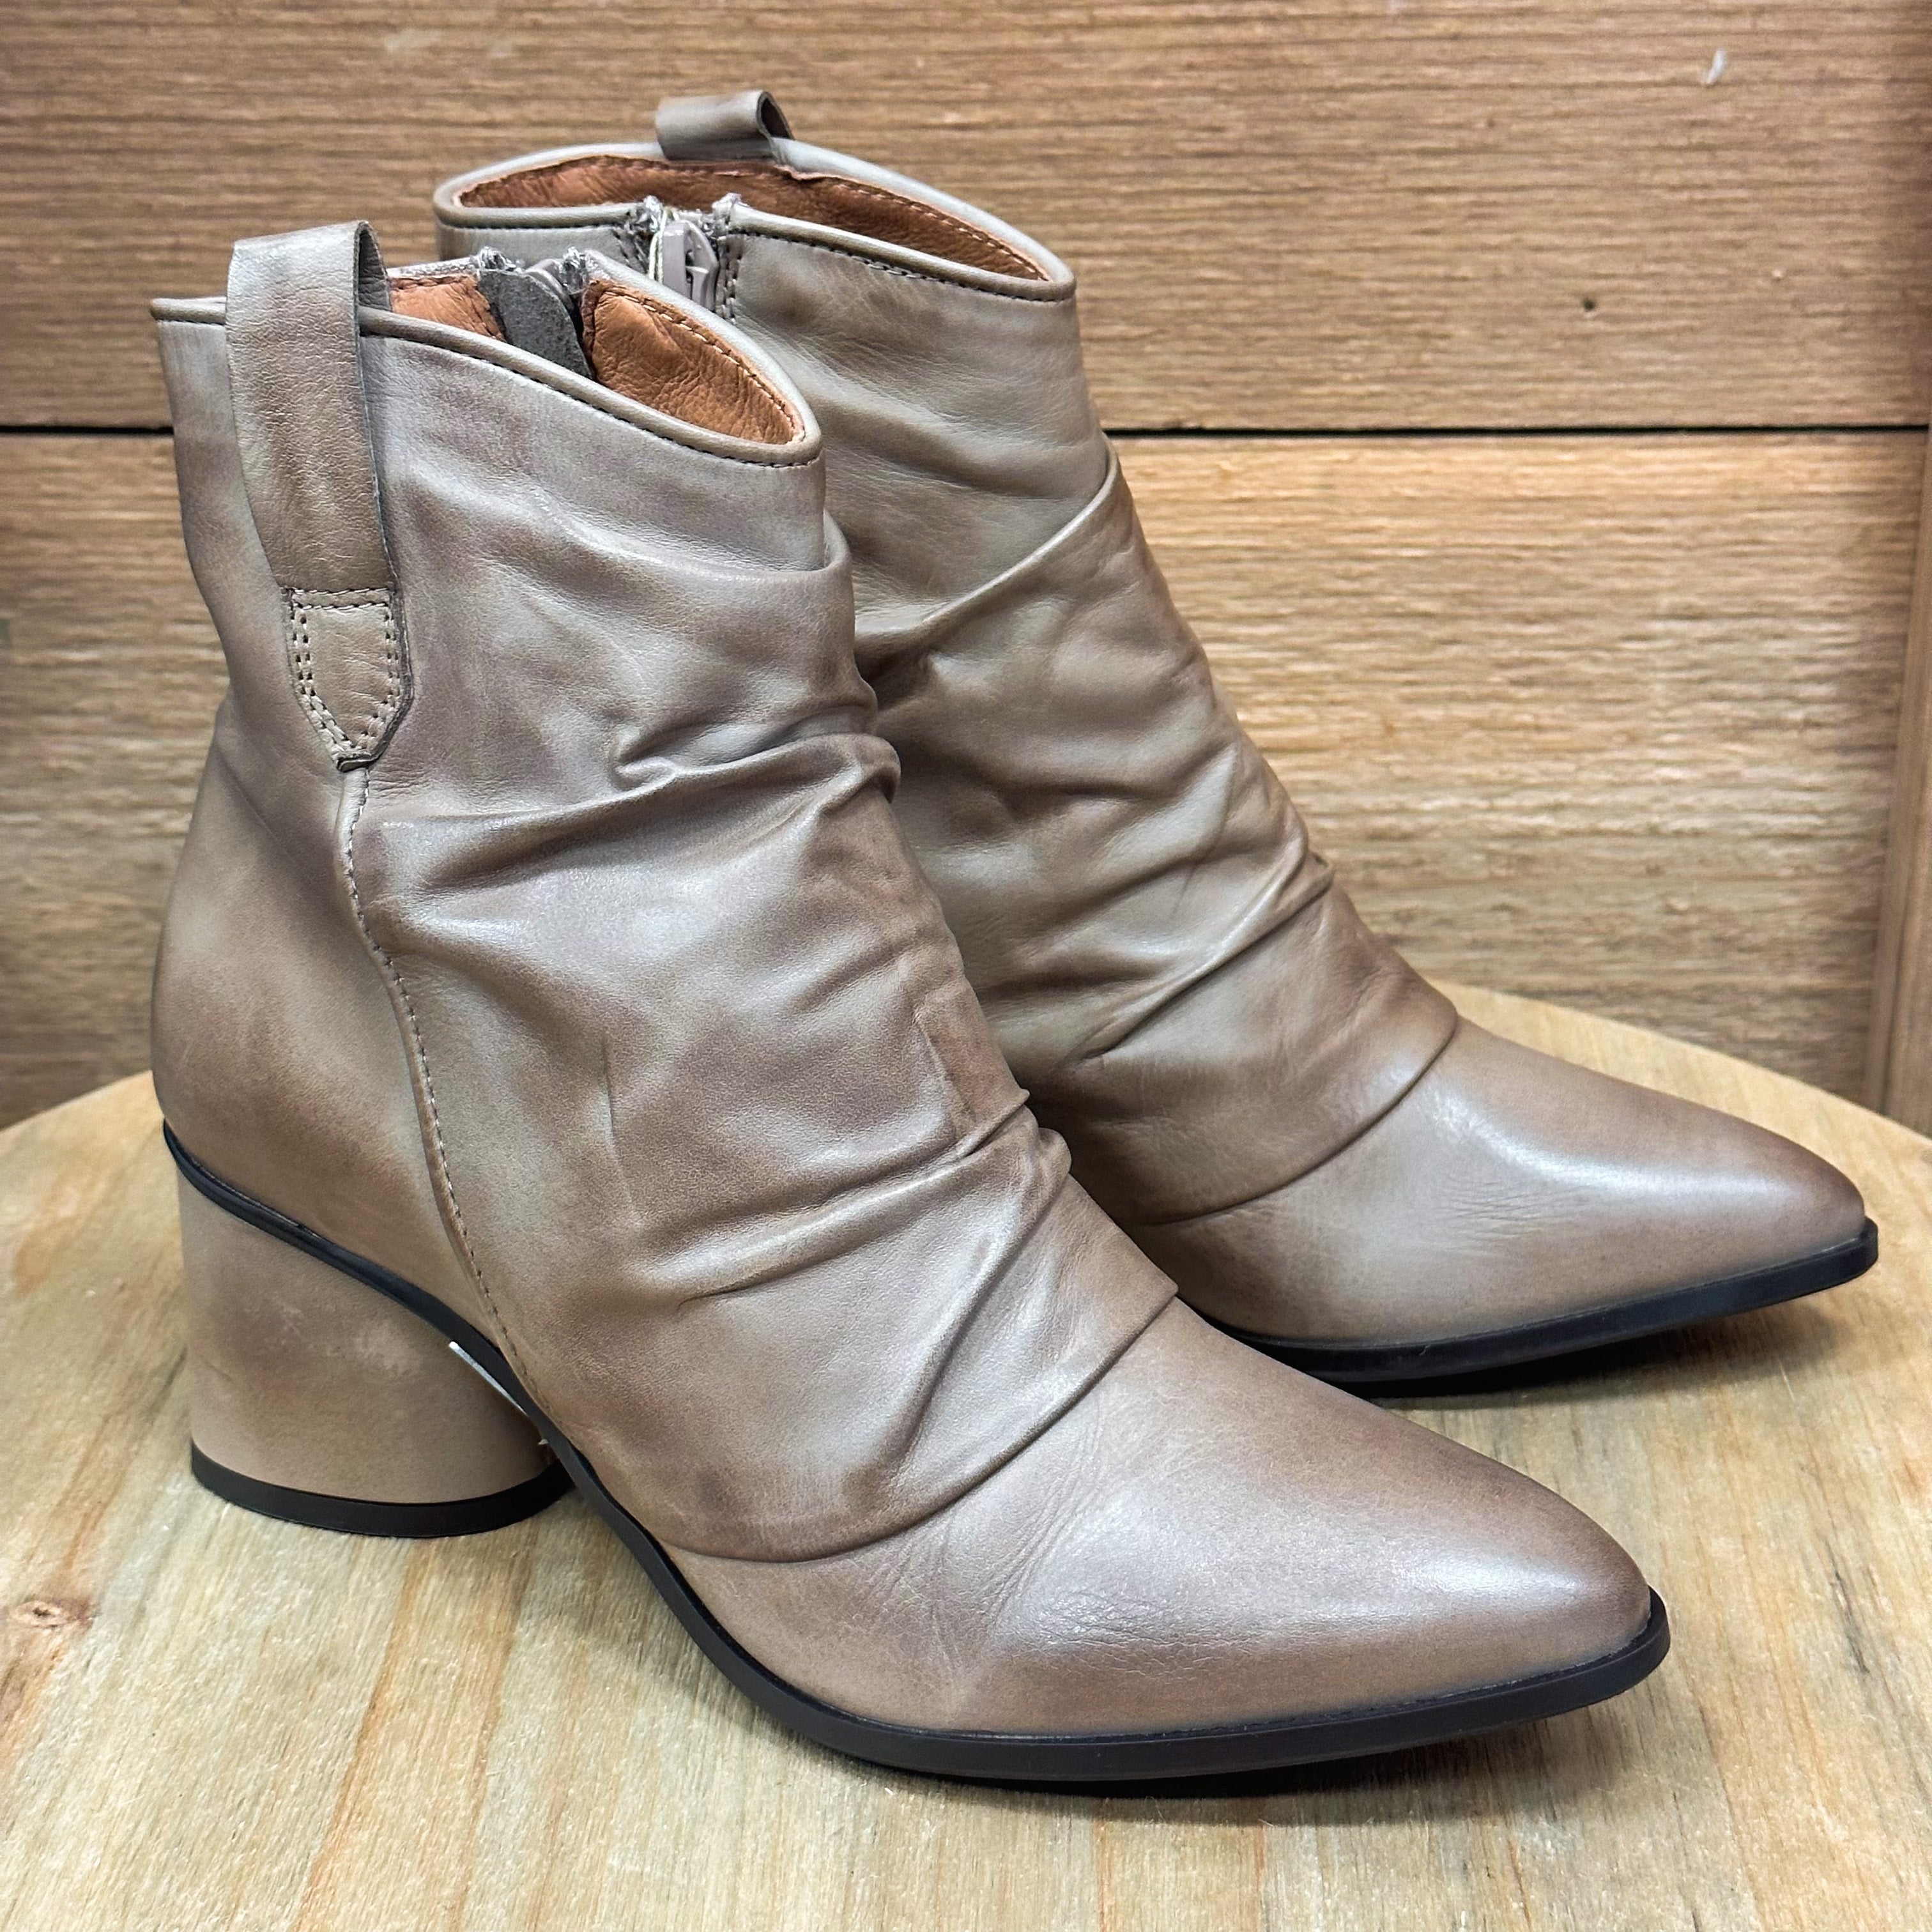 Miz Mooz Leather Ruched Ankle Boots - Jared on QVC 